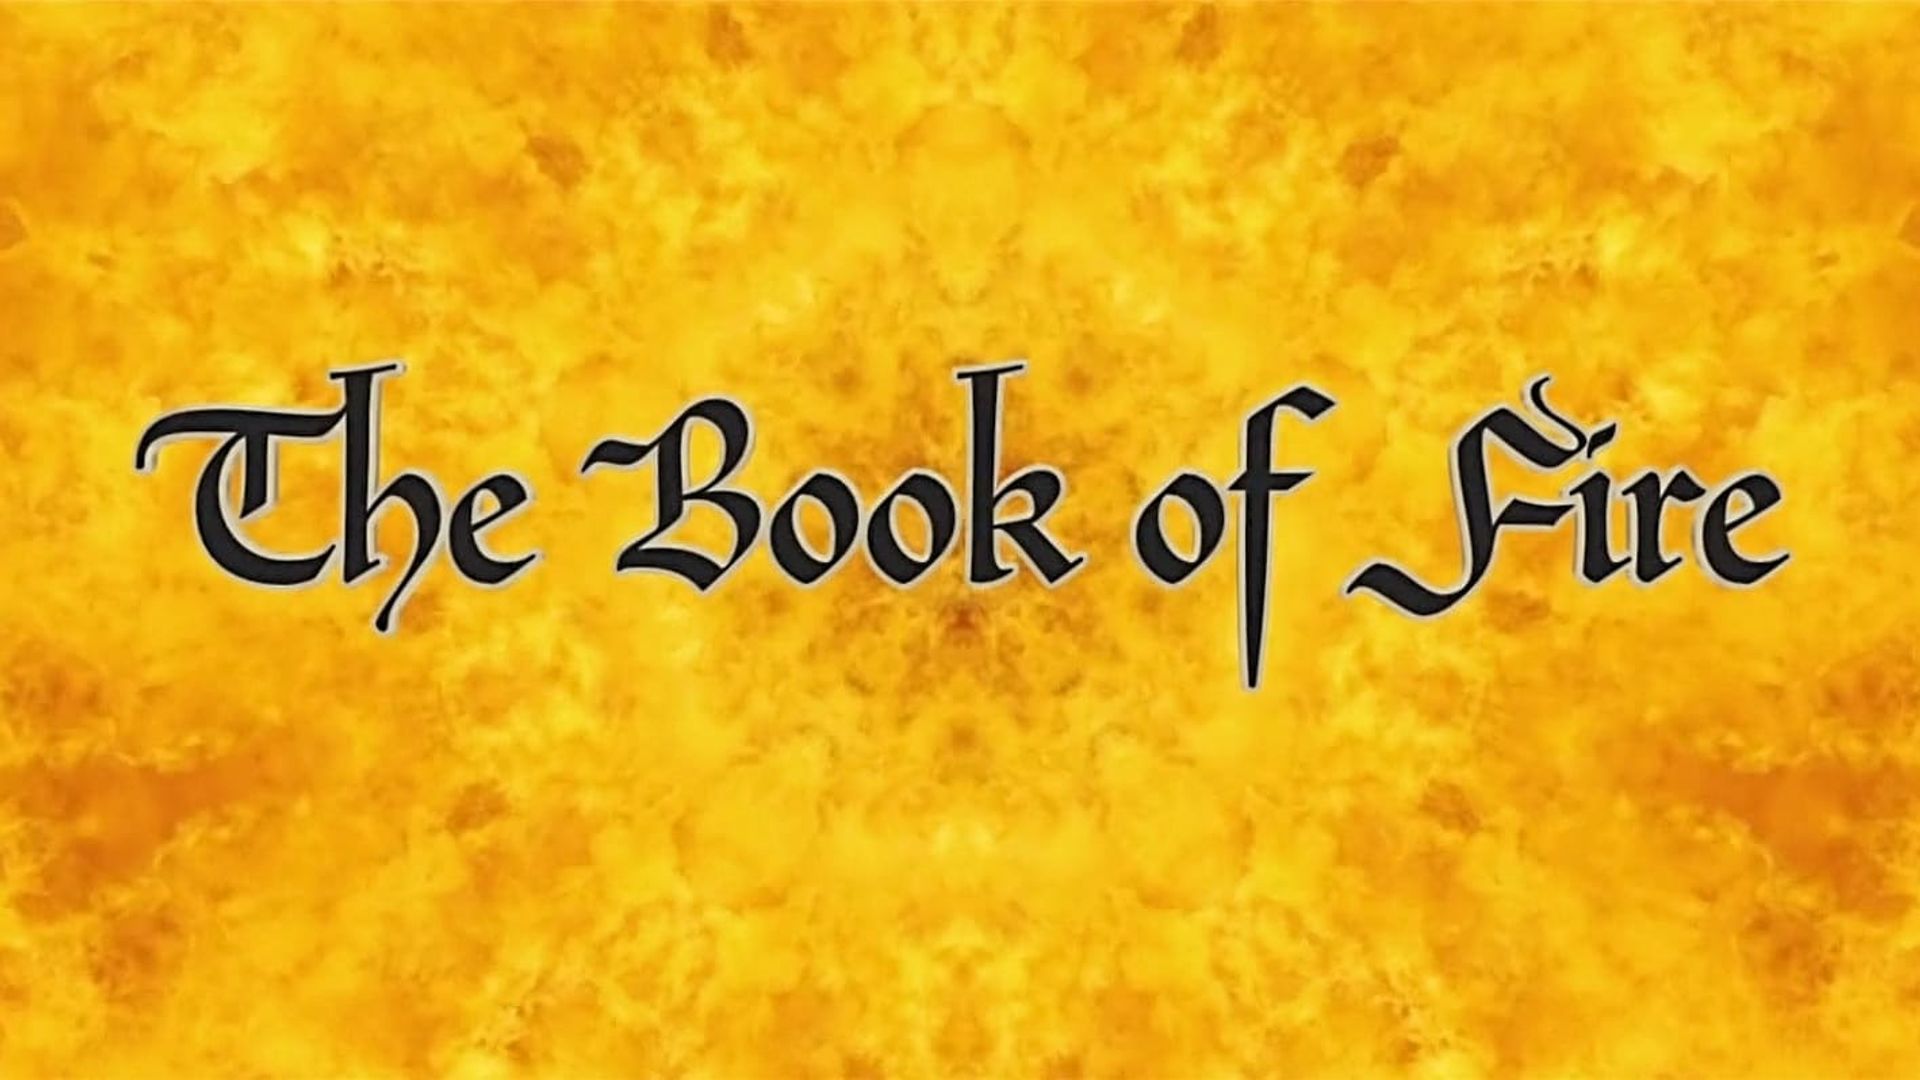 Book of Fire background